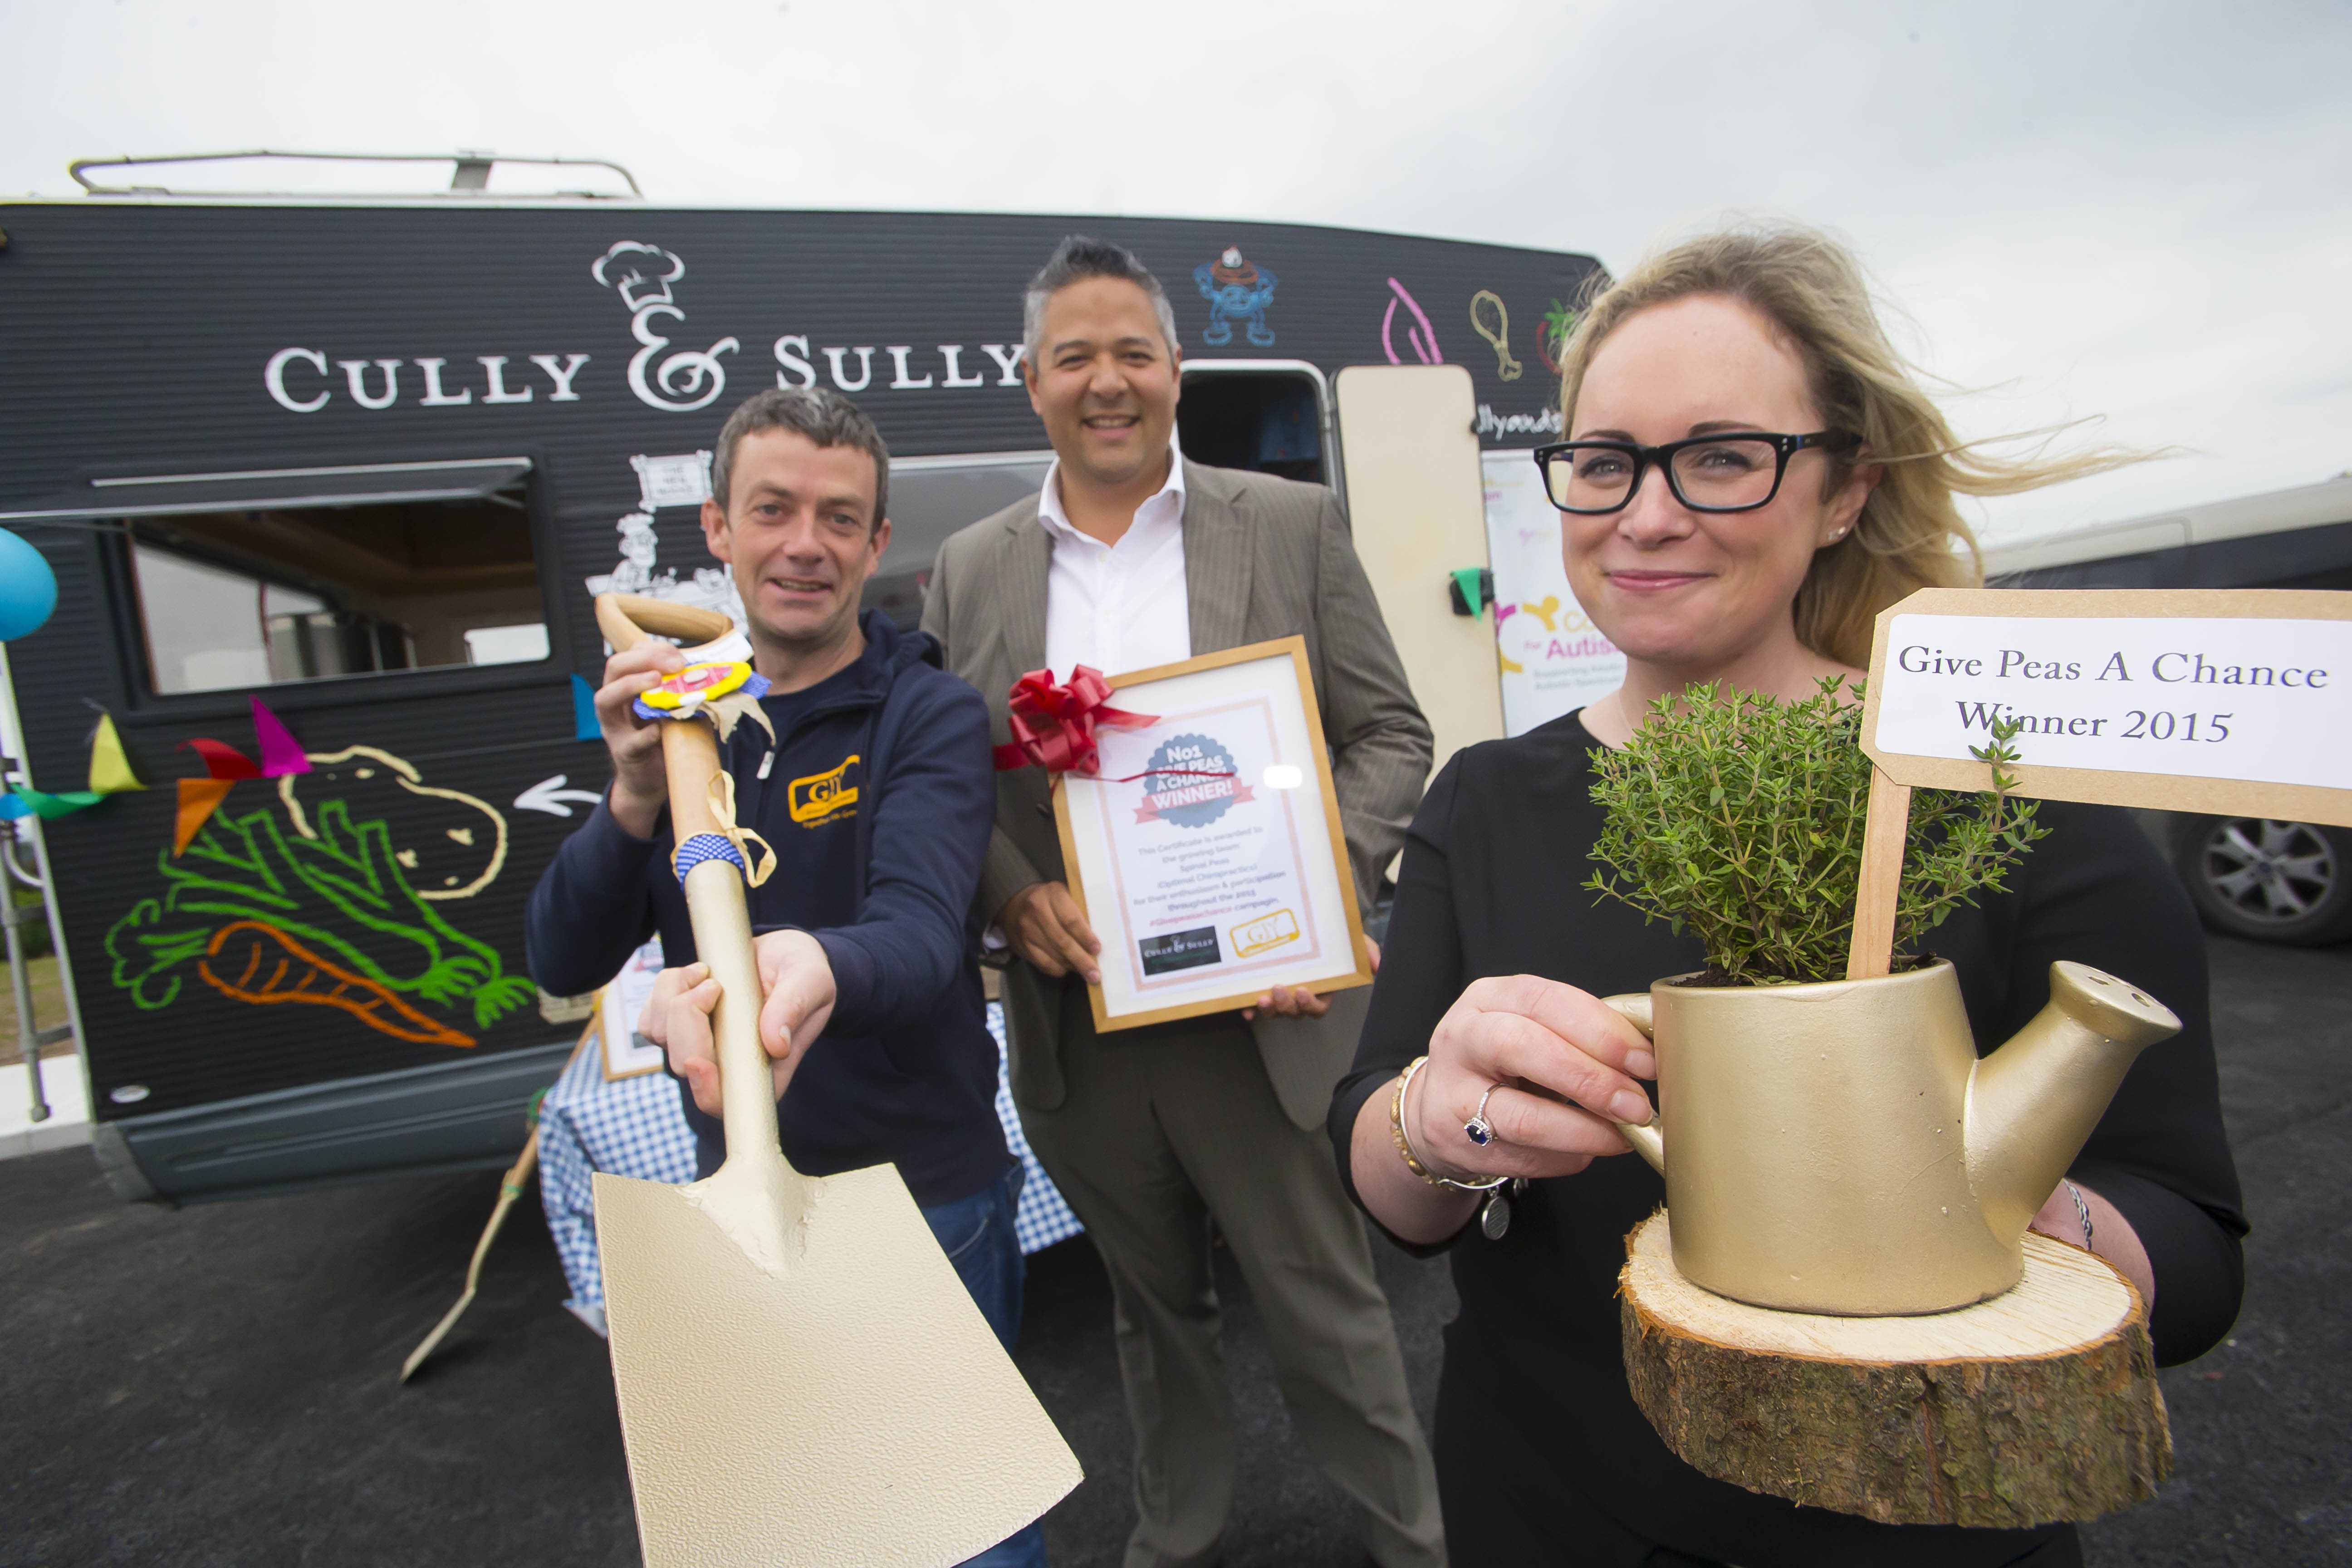 Michael Kelly founder of GIY and Rena O’Donovan of Cully & Sully with Ben Martin of Chiropractors from Optimal Chiropractic in Cork who were named ‘Grow at Work’ winners 2015